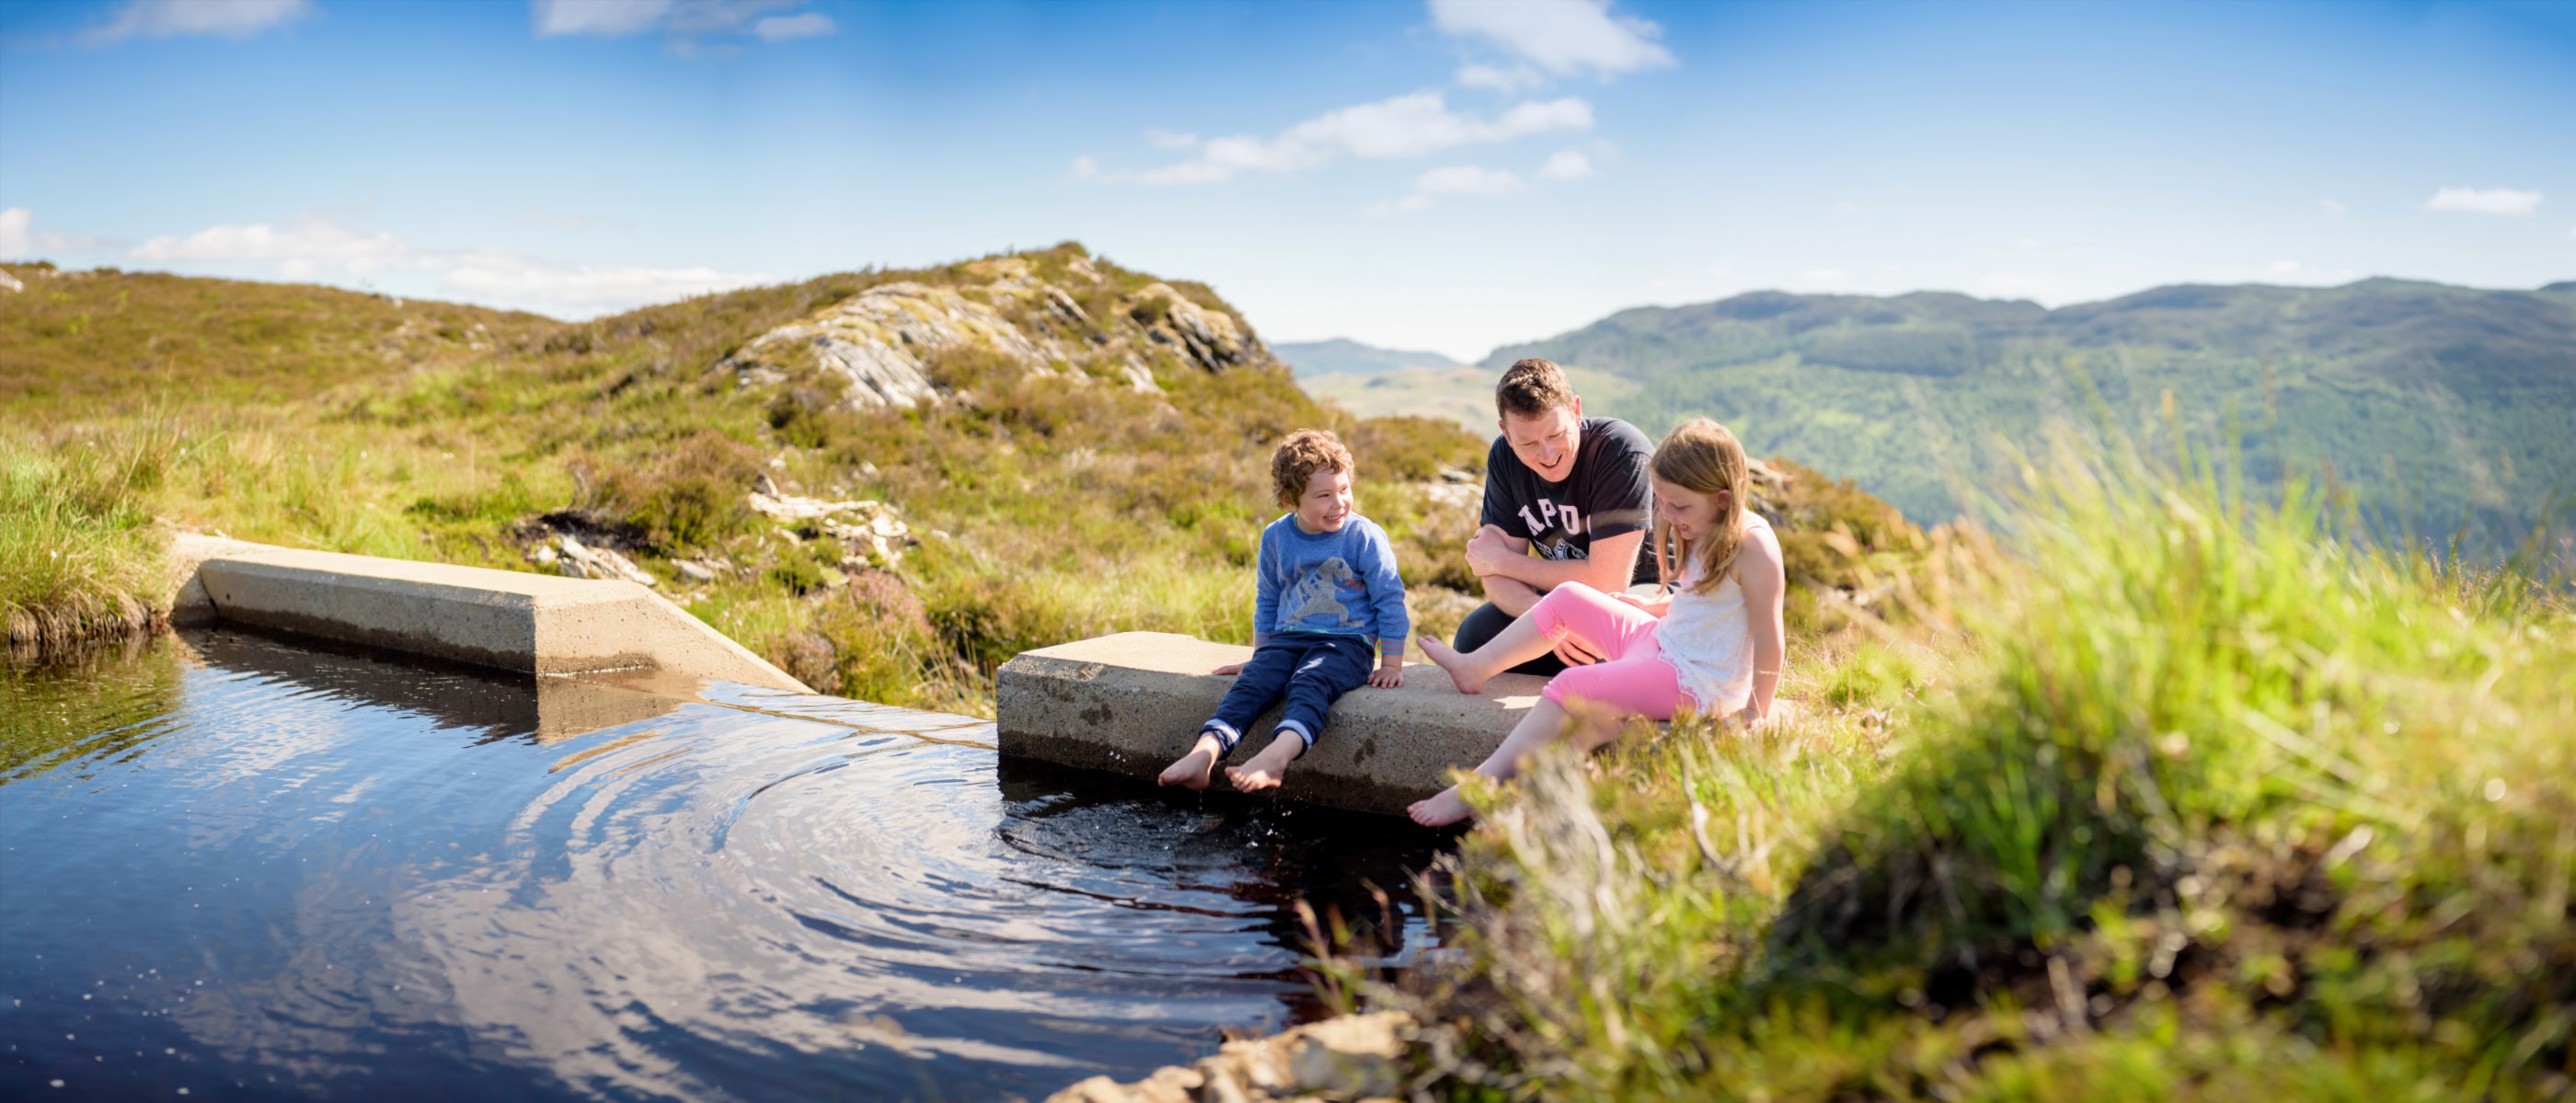 Family enjoying a nice day at our micro-hydro scheme